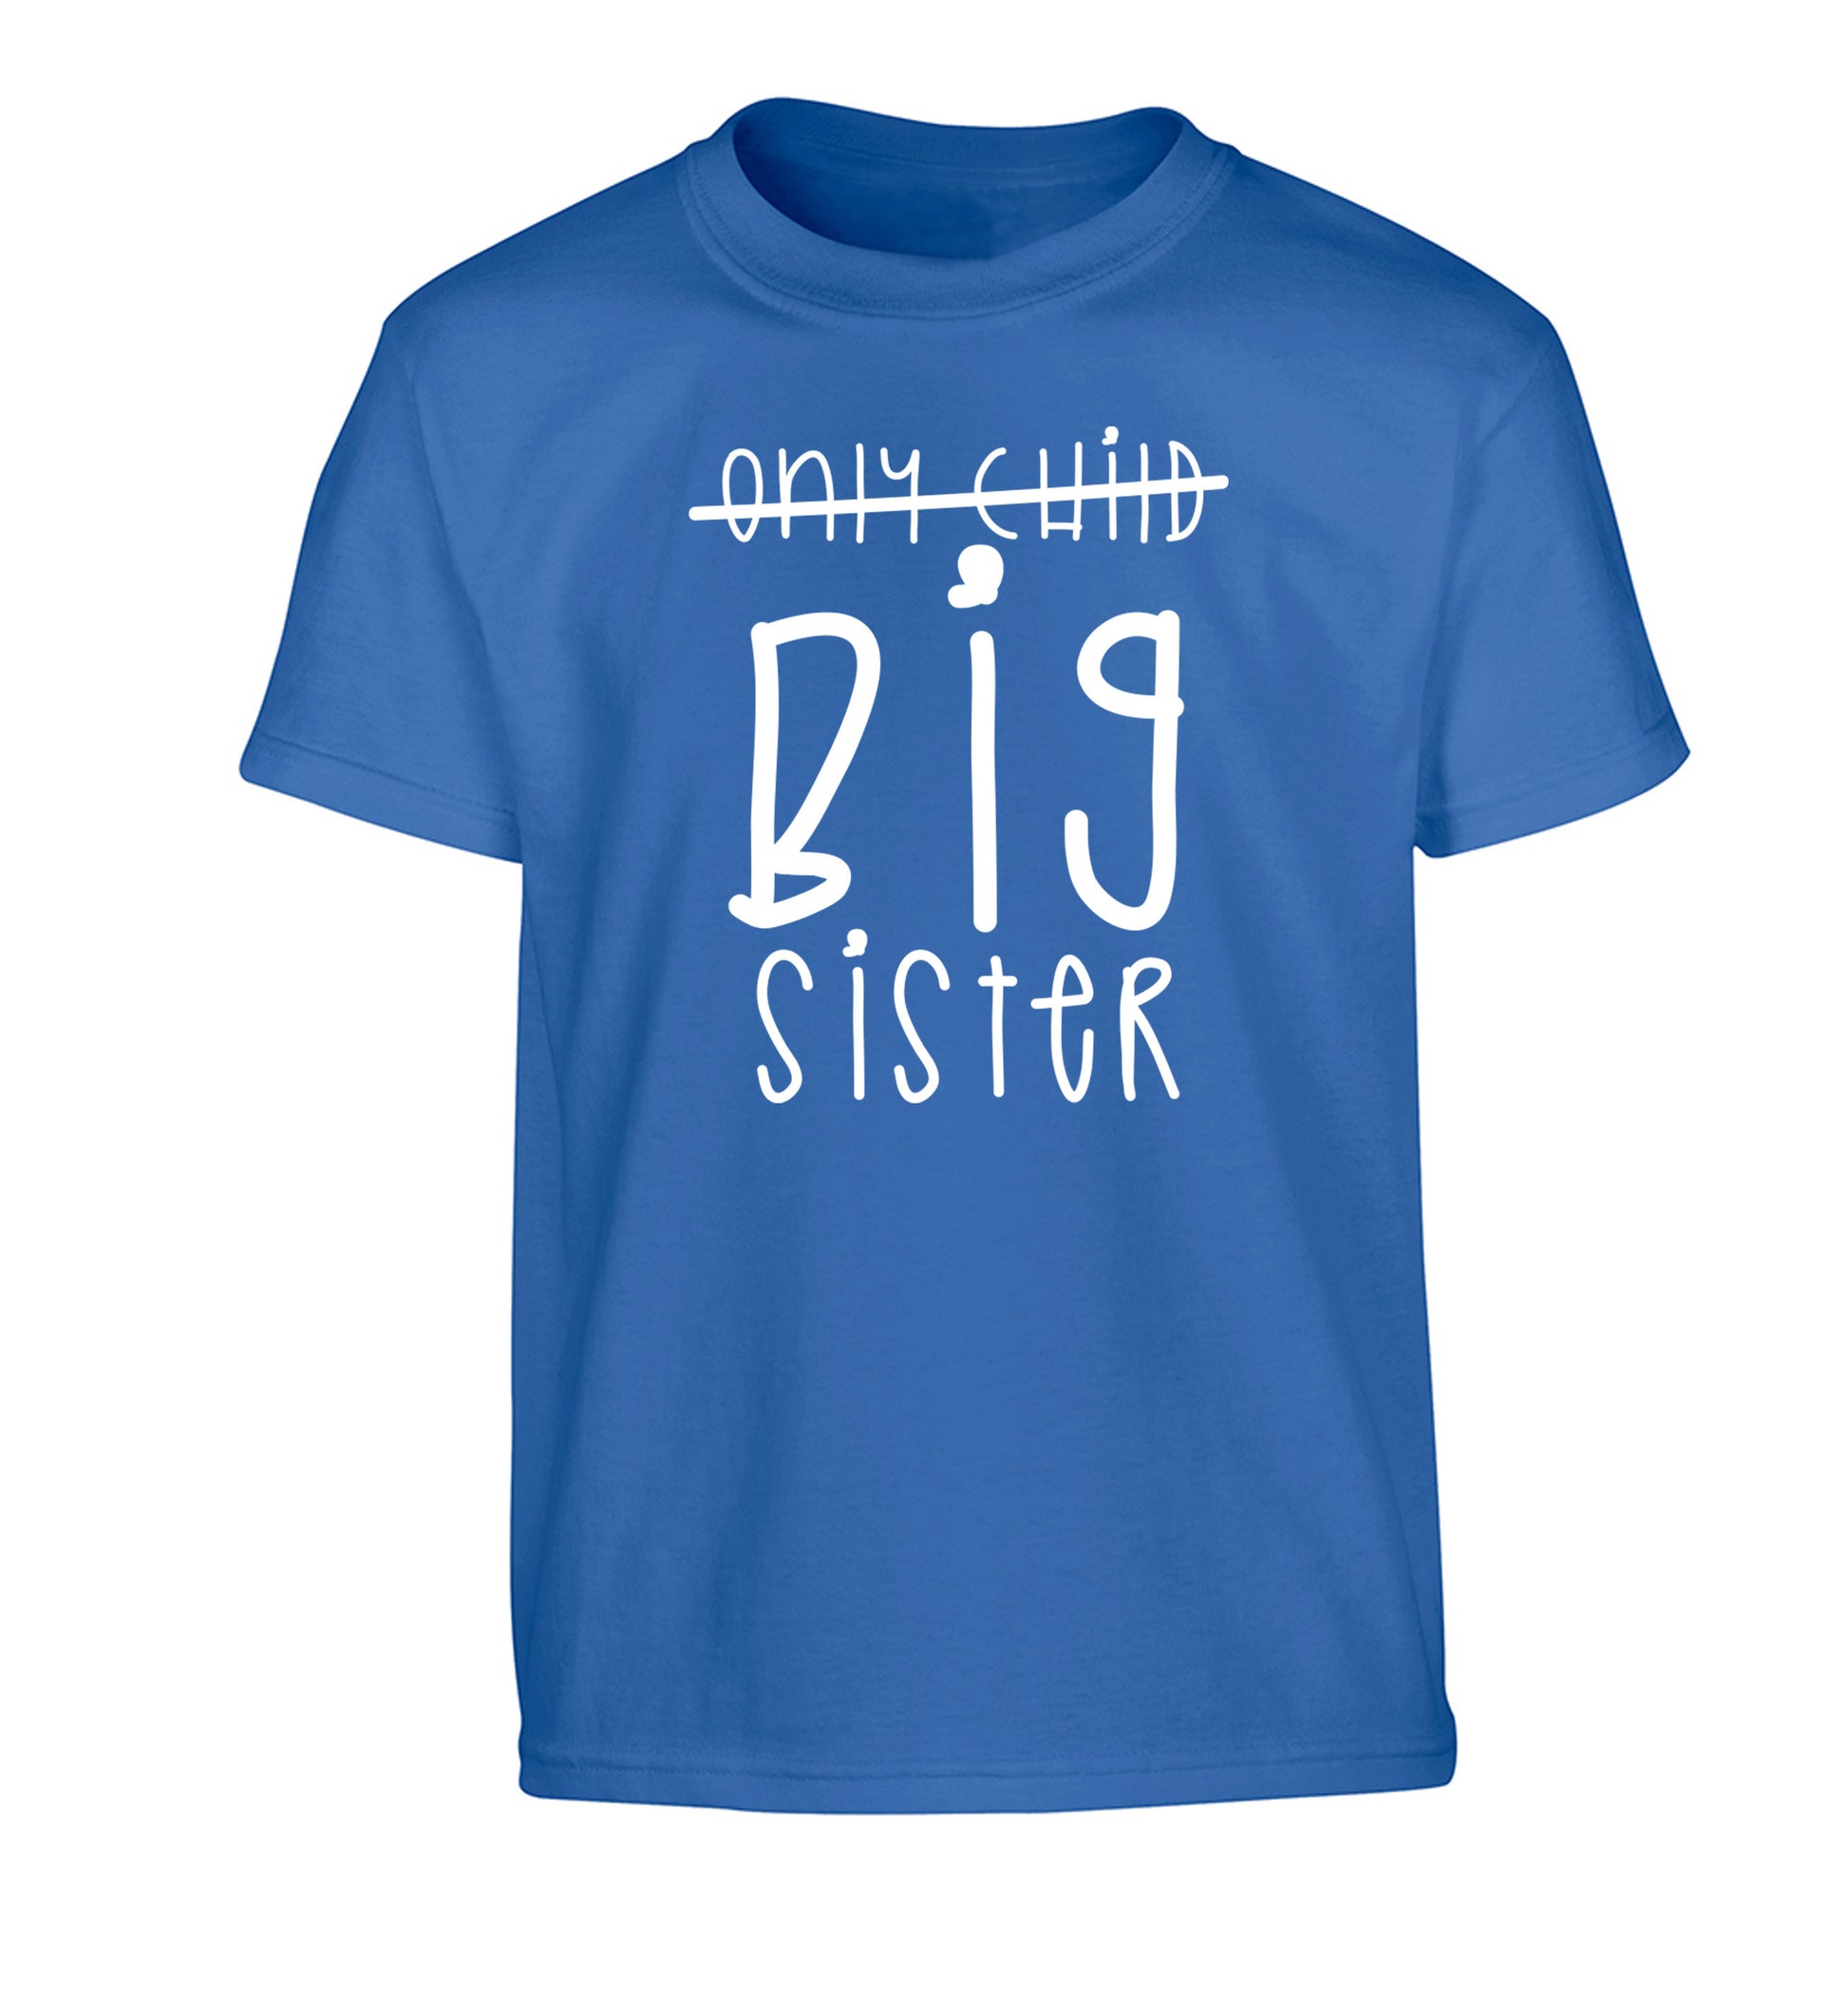 Only child big sister Children's blue Tshirt 12-14 Years